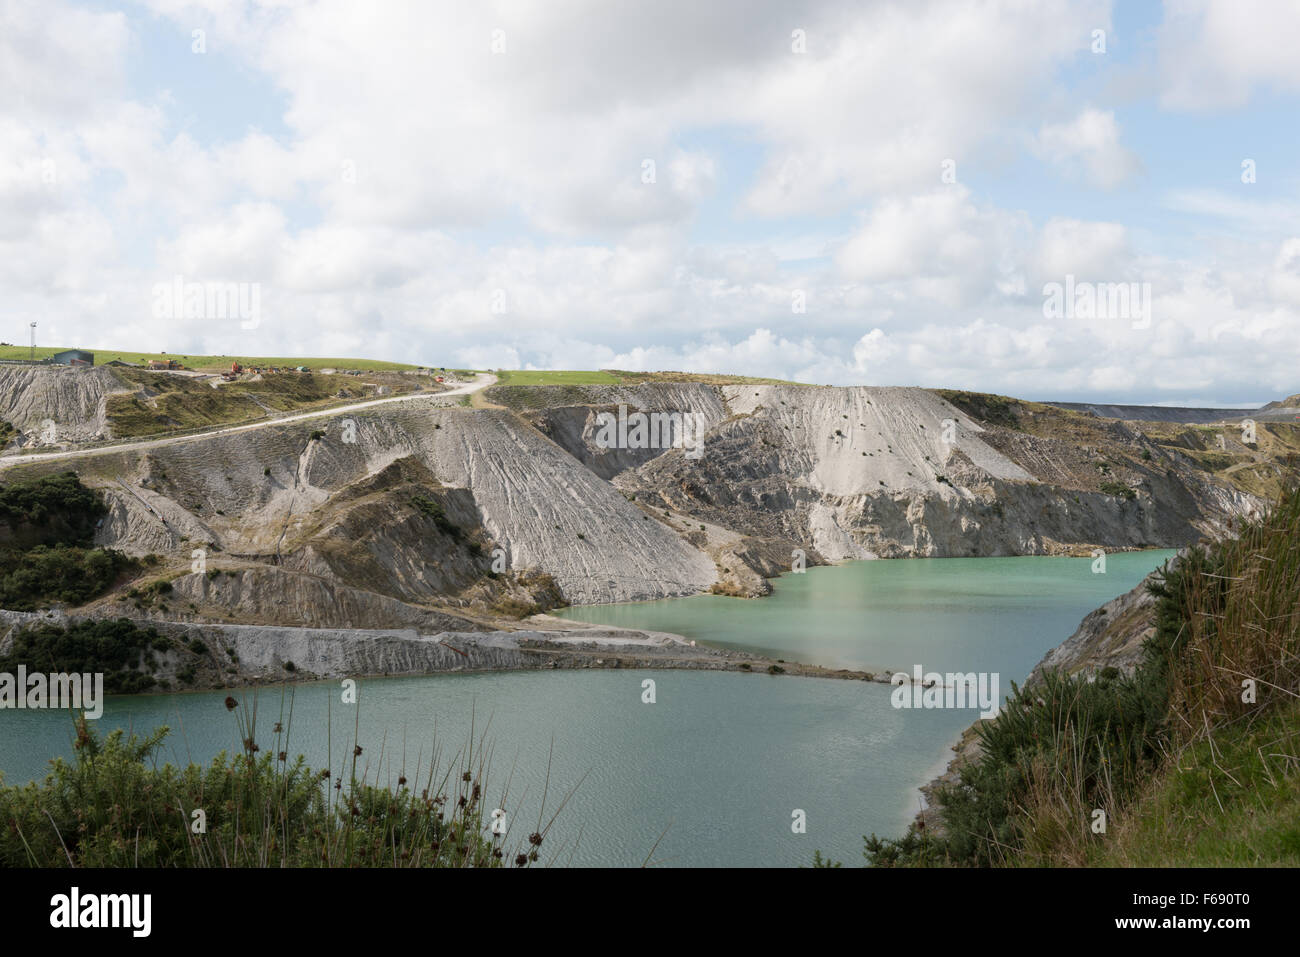 Spoil heaps alongside water filled china-clay pit on edge of Dartmoor Stock Photo